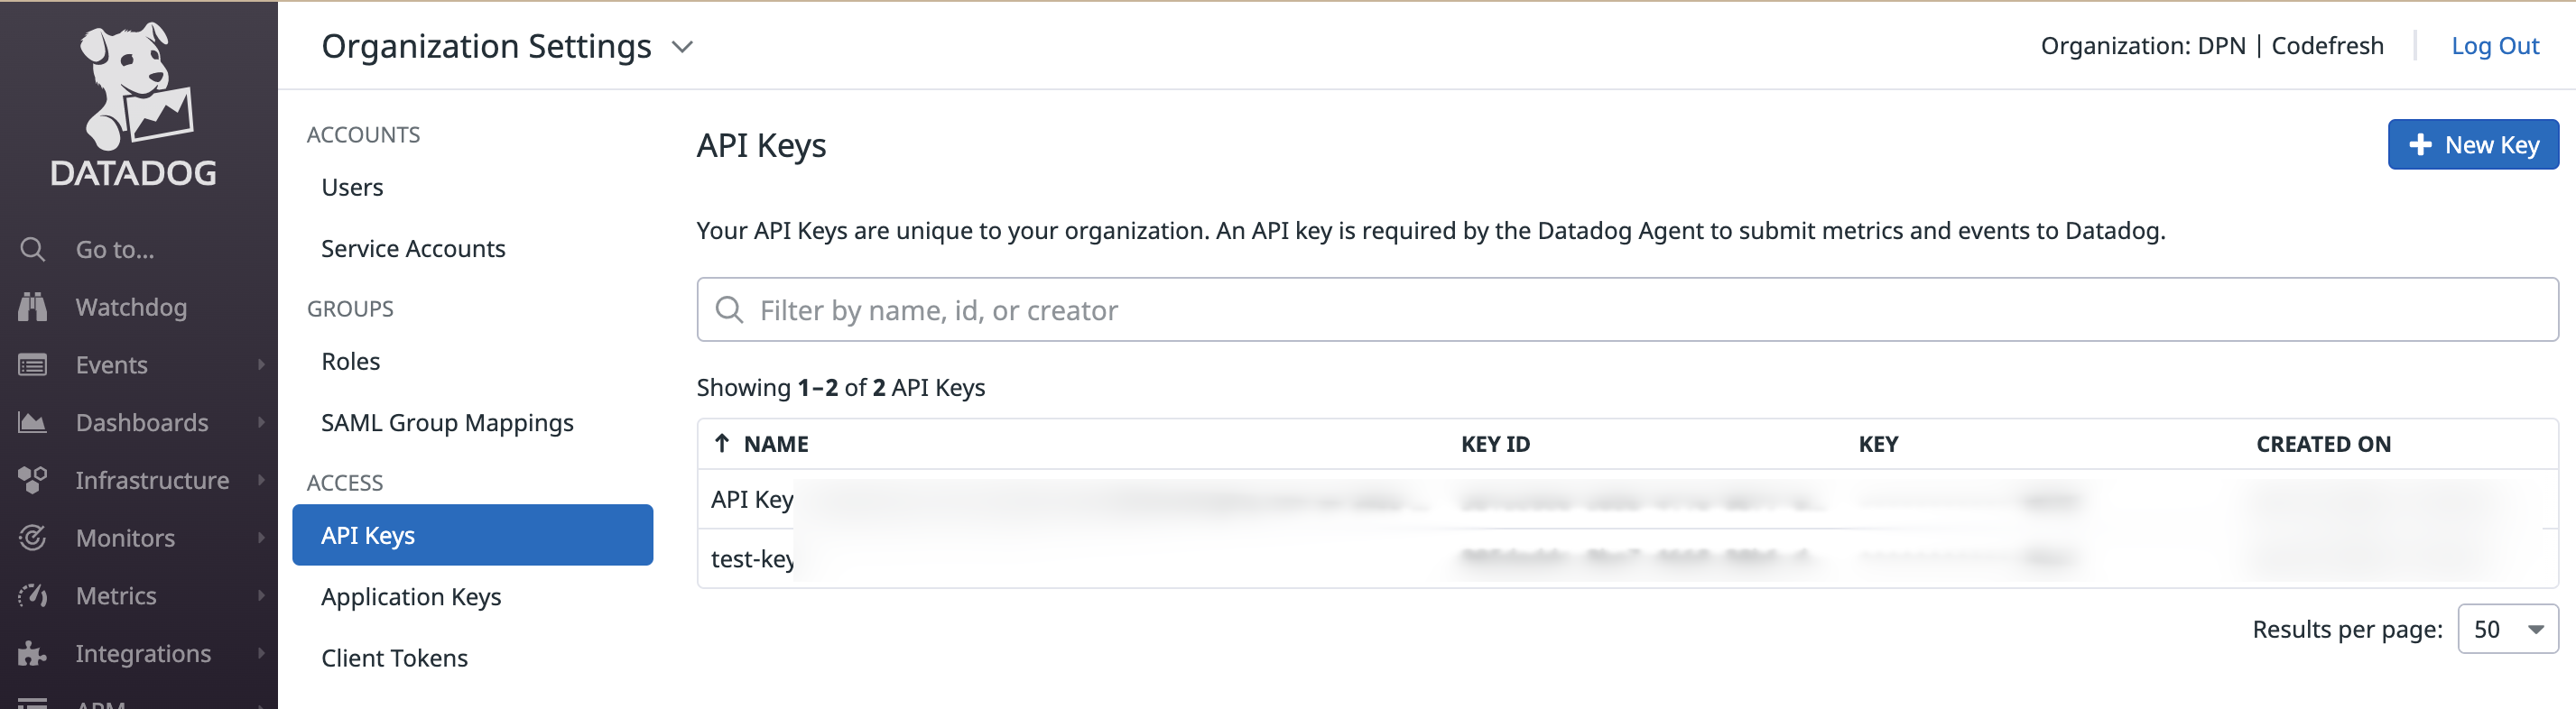 Getting an API Key from your Datadog account